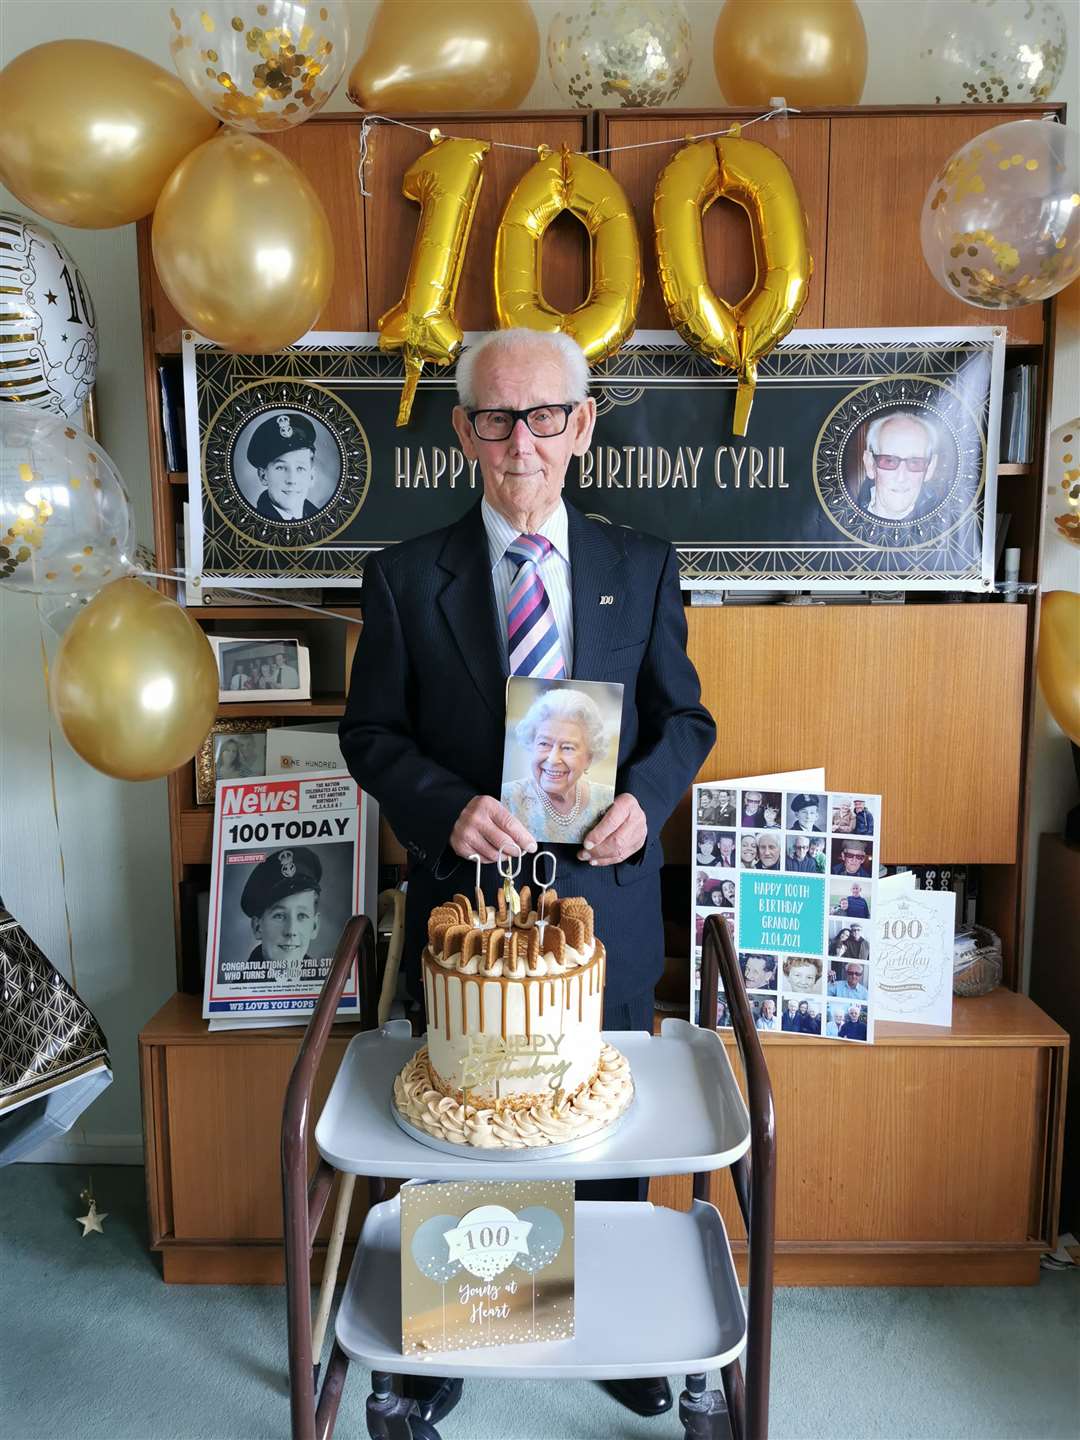 Cyril Stuart celebrates his 100th birthday with cards, balloons, cake and his military memories